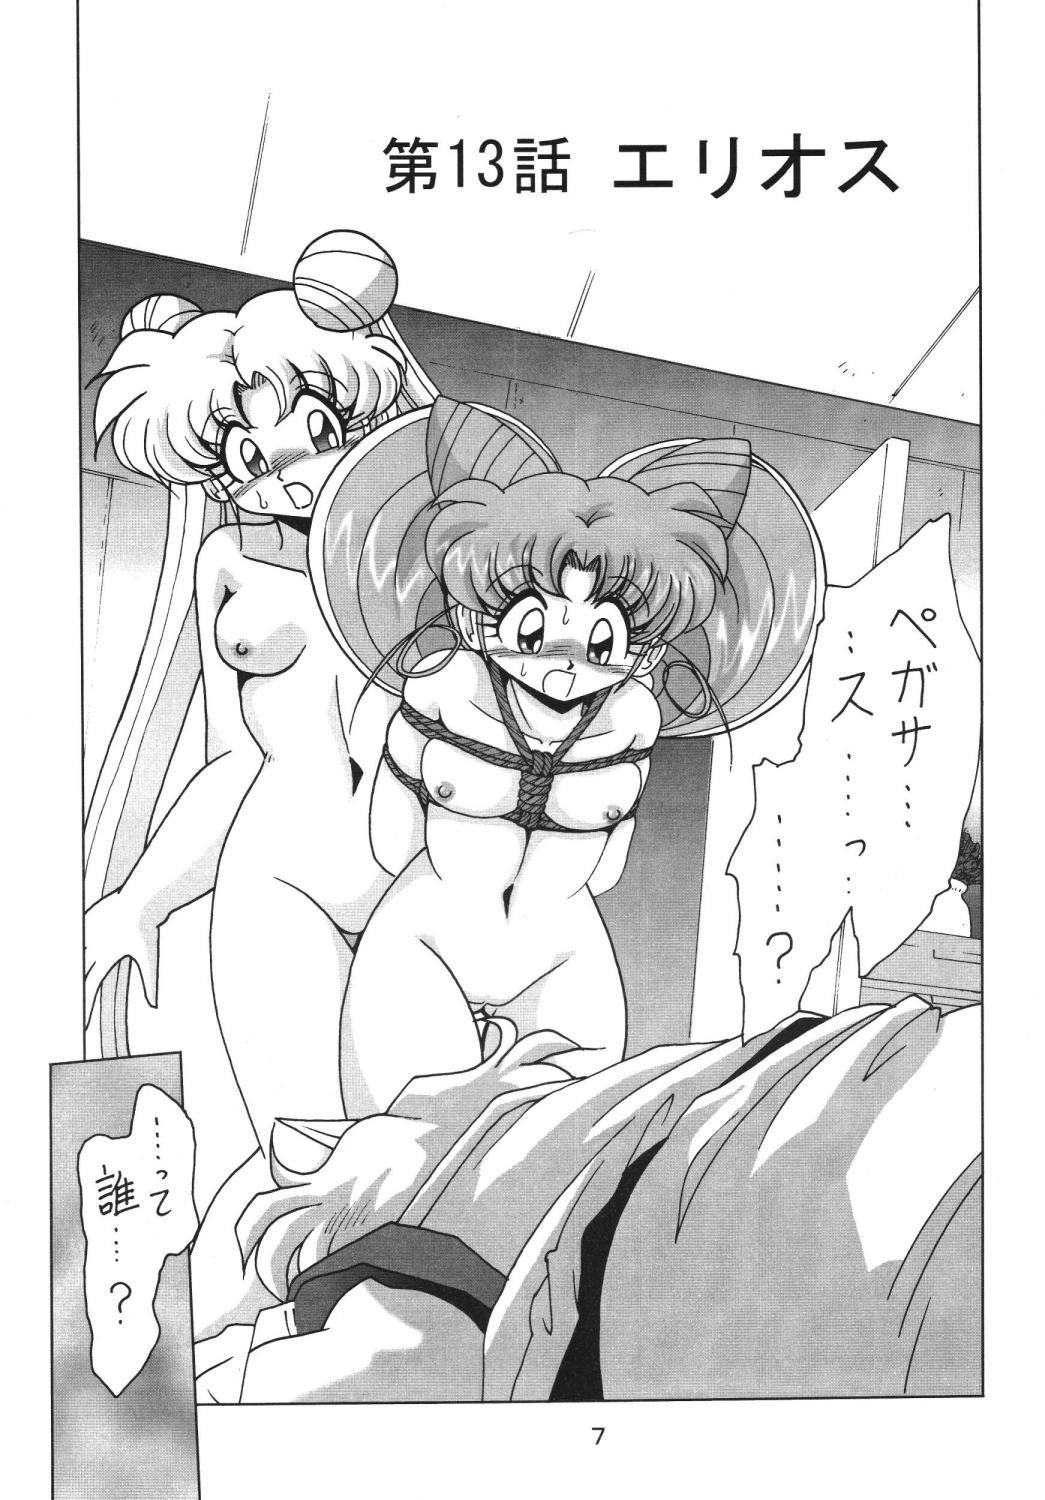 Free Hard Core Porn Silent Saturn SS vol. 7 - Sailor moon Horny - Page 6